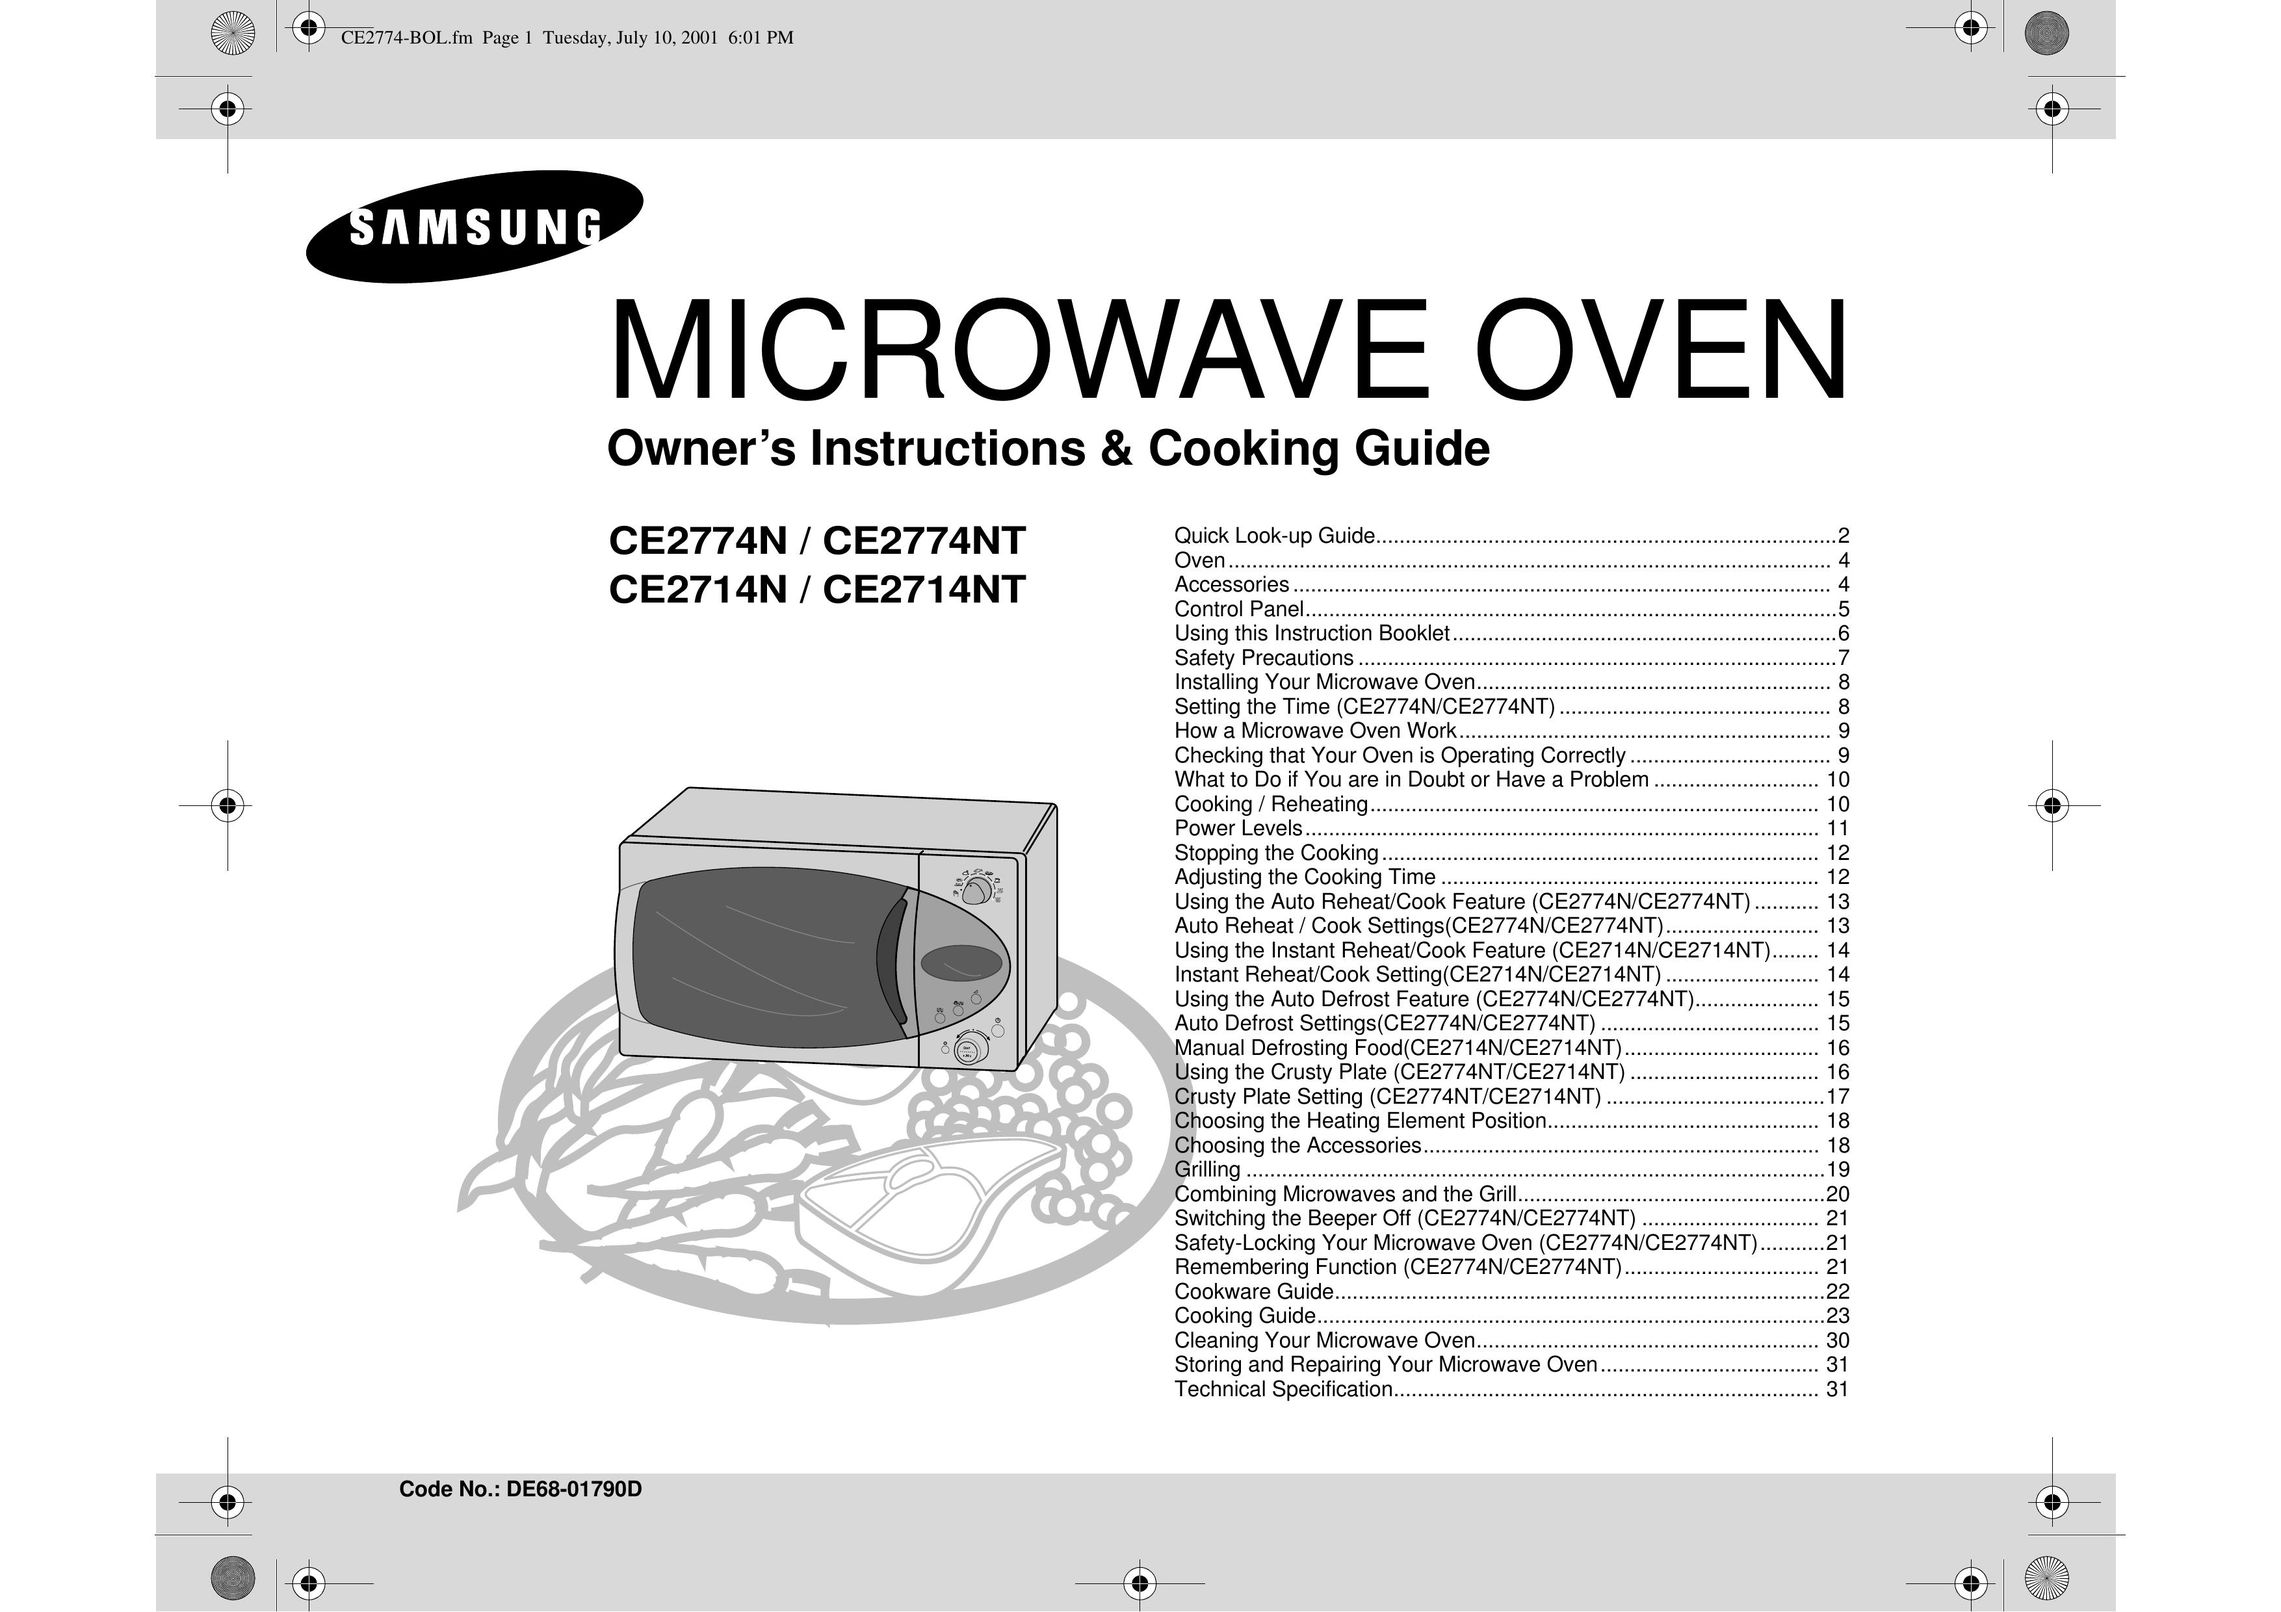 Samsung CE2774NT Microwave Oven User Manual